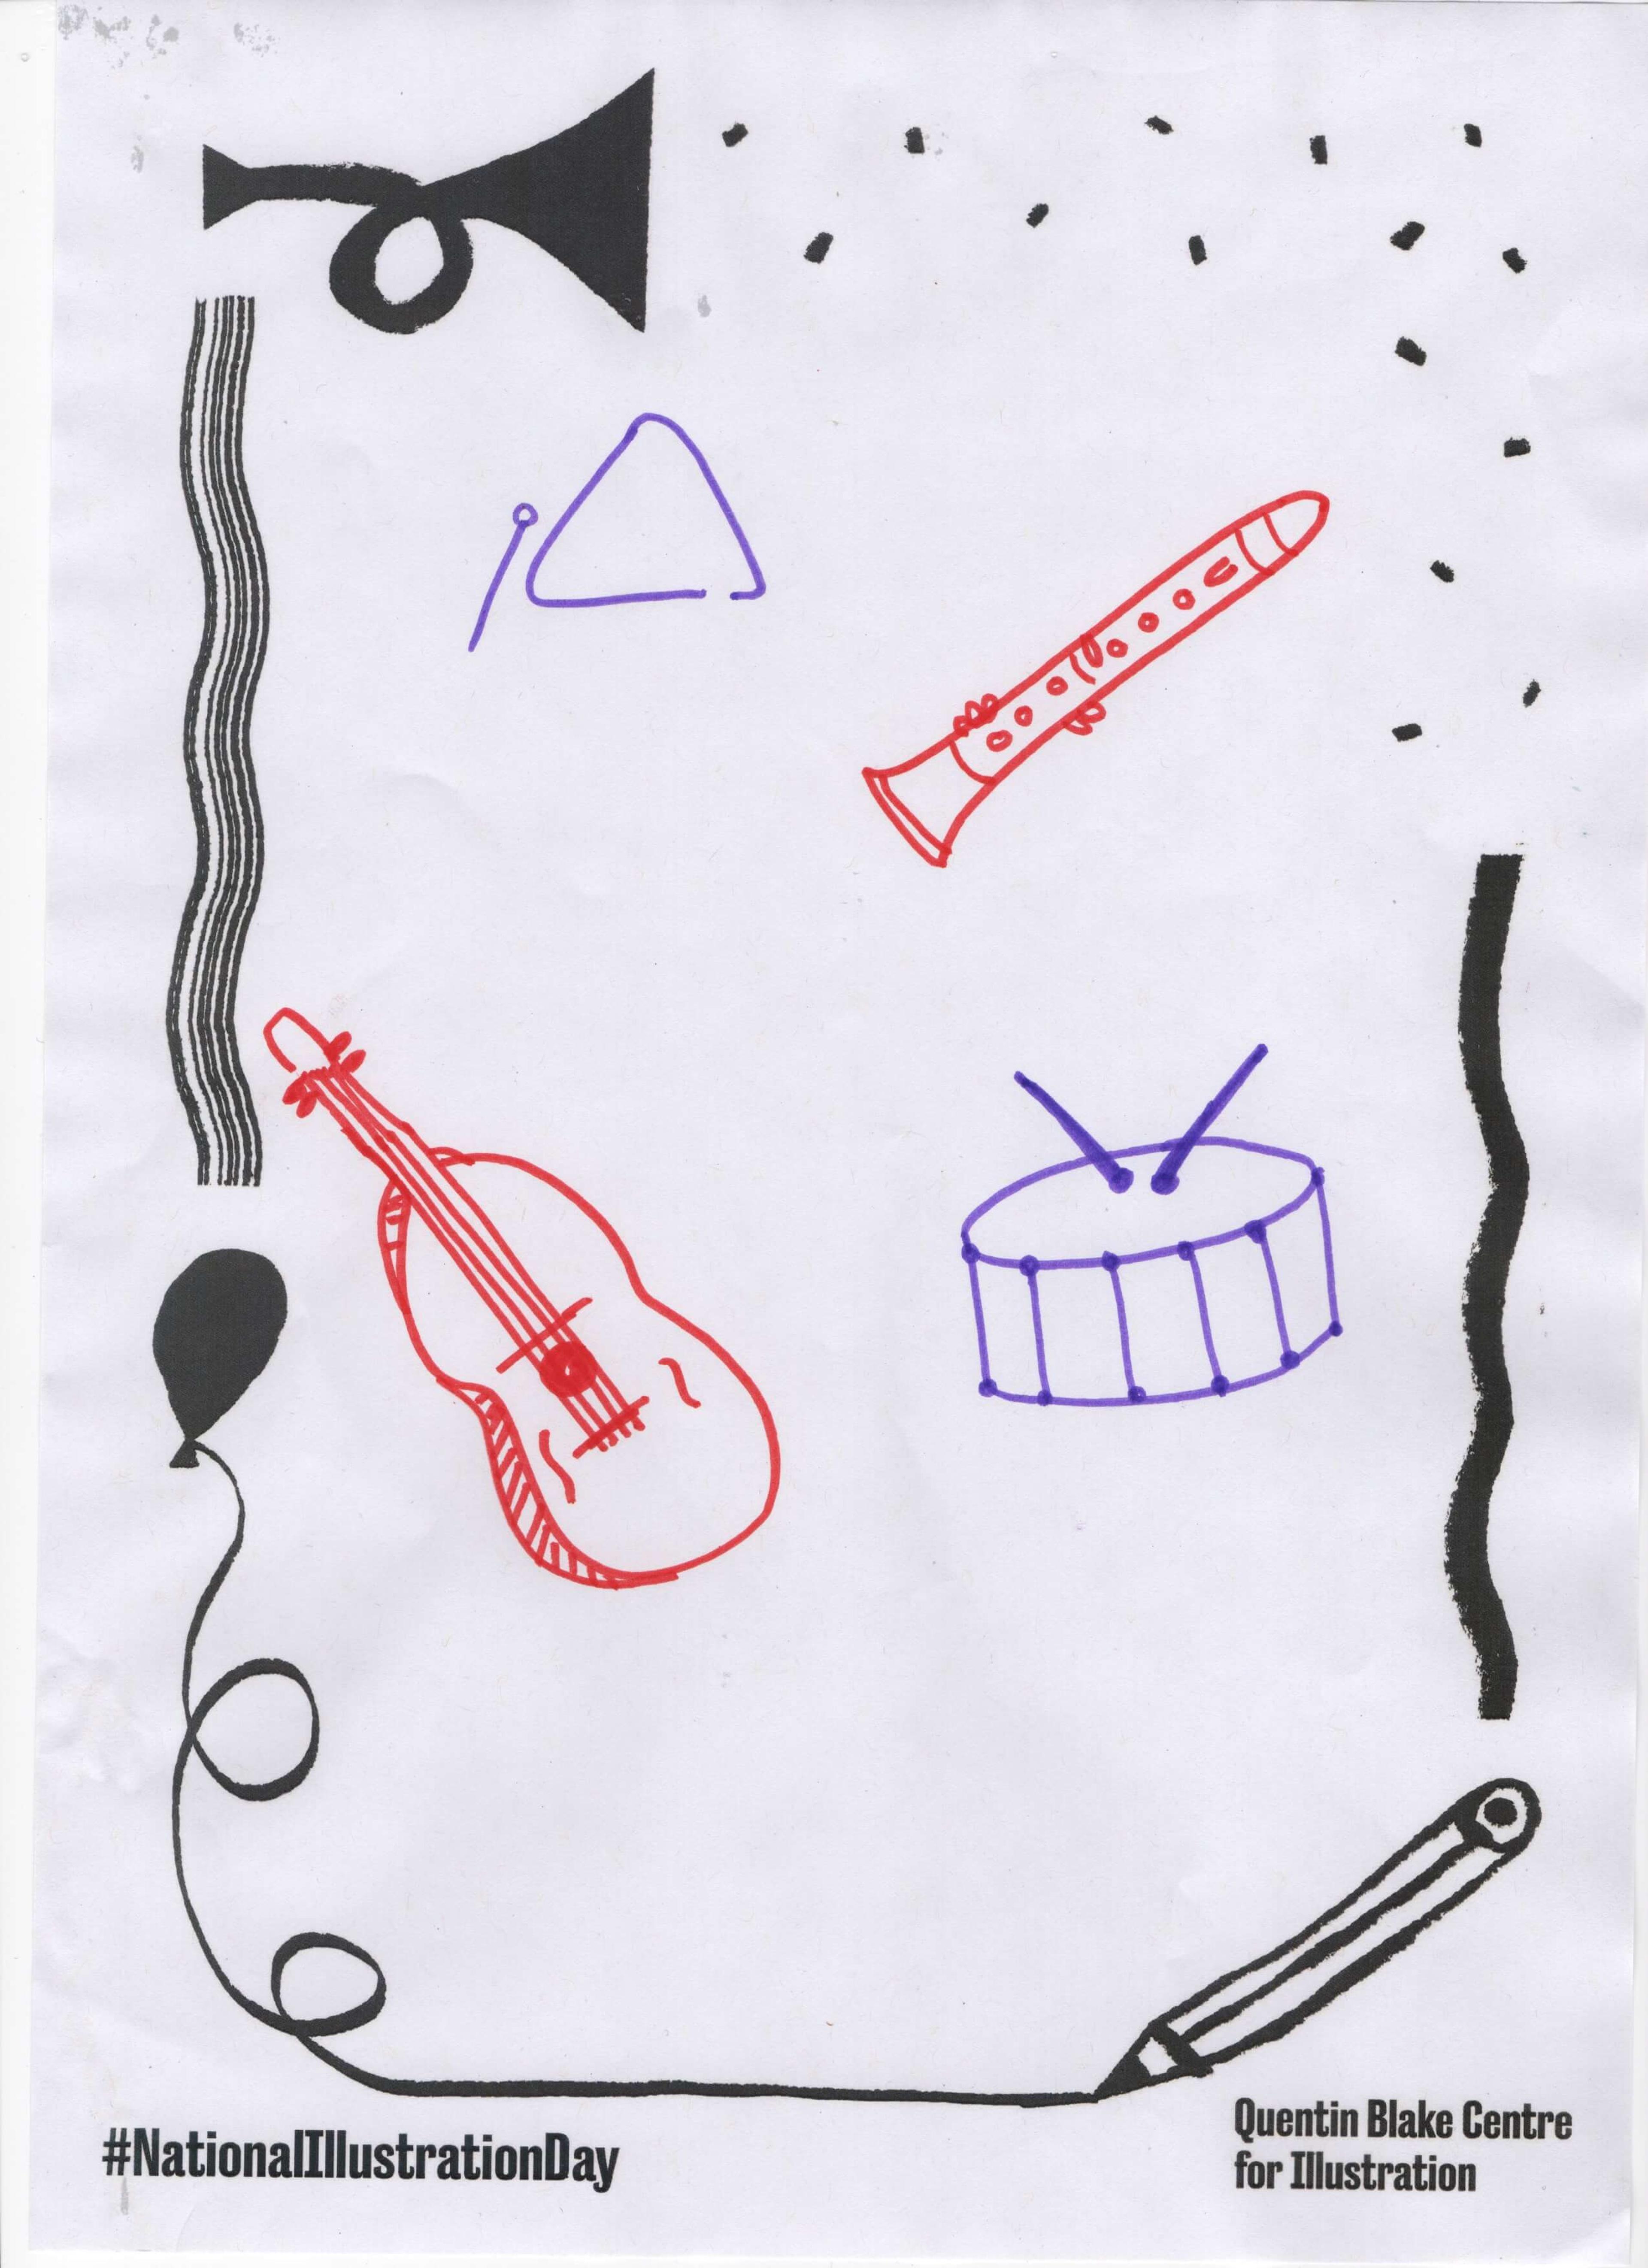 Outline drawings of a triangle, clarinet, guitar and snare drums.